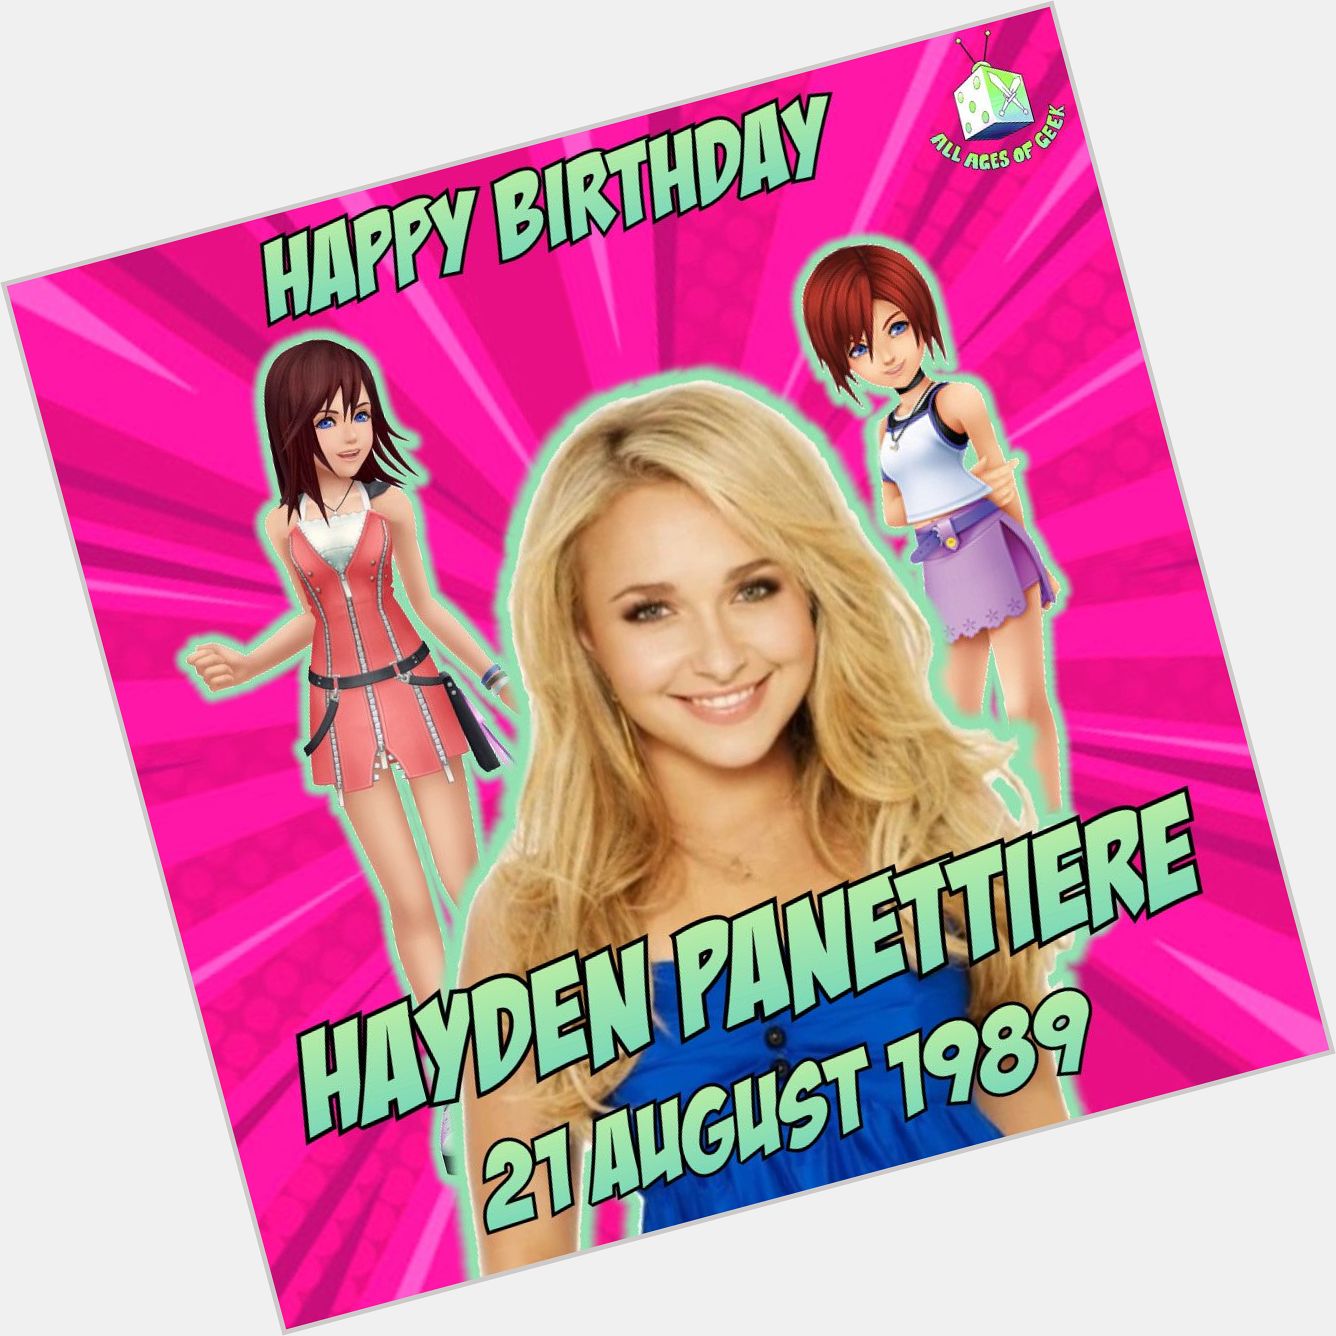 Happy birthday  to actress and VA for Kairi in 1 and 2, Hayden Panettiere! 